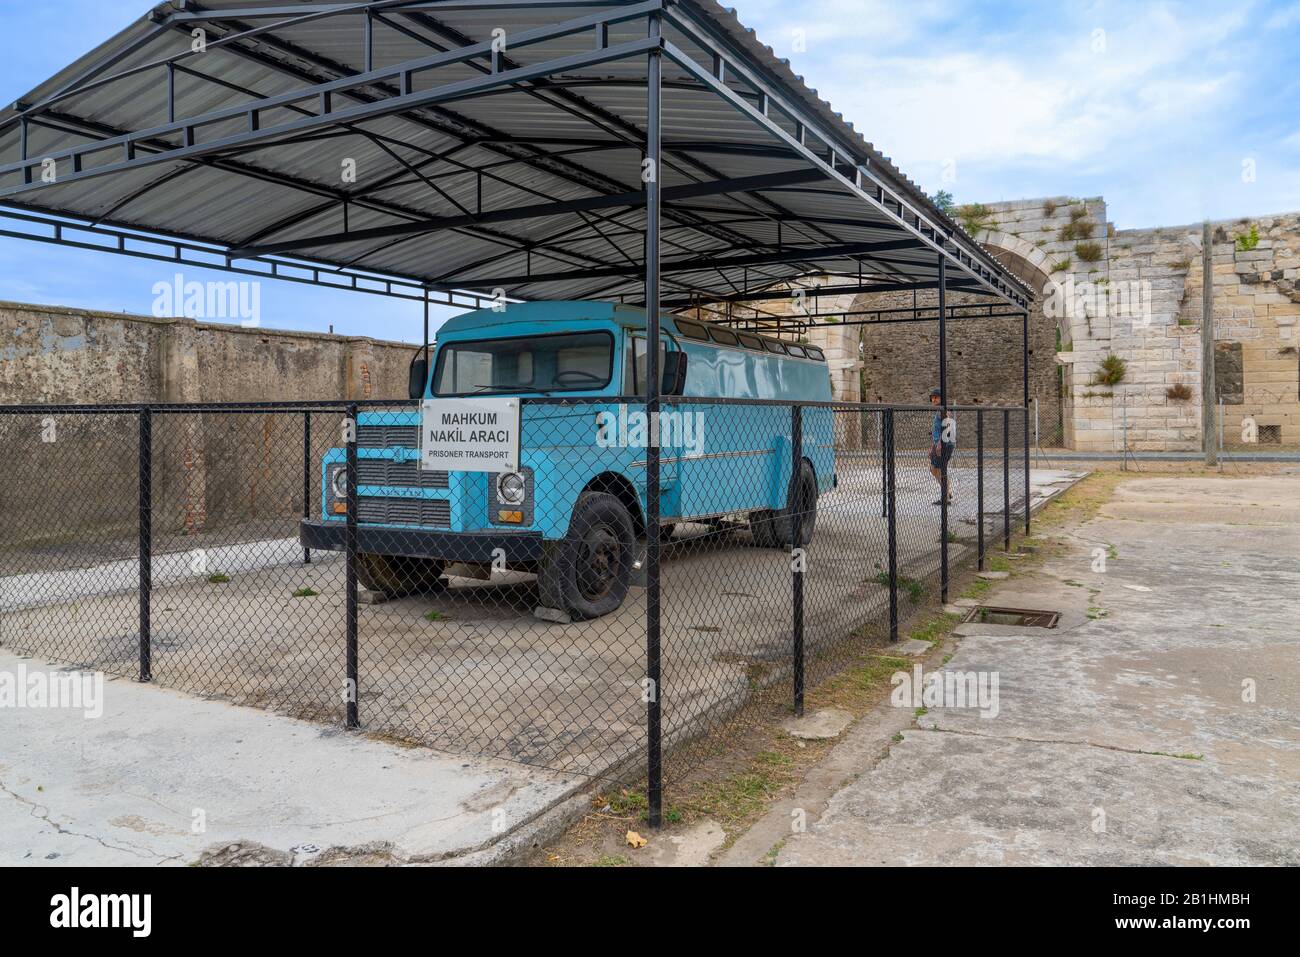 Sinop/Turkey - August 04 2019:Blue  bus for prisoner transportation in old Sinop Fortress Prison Stock Photo